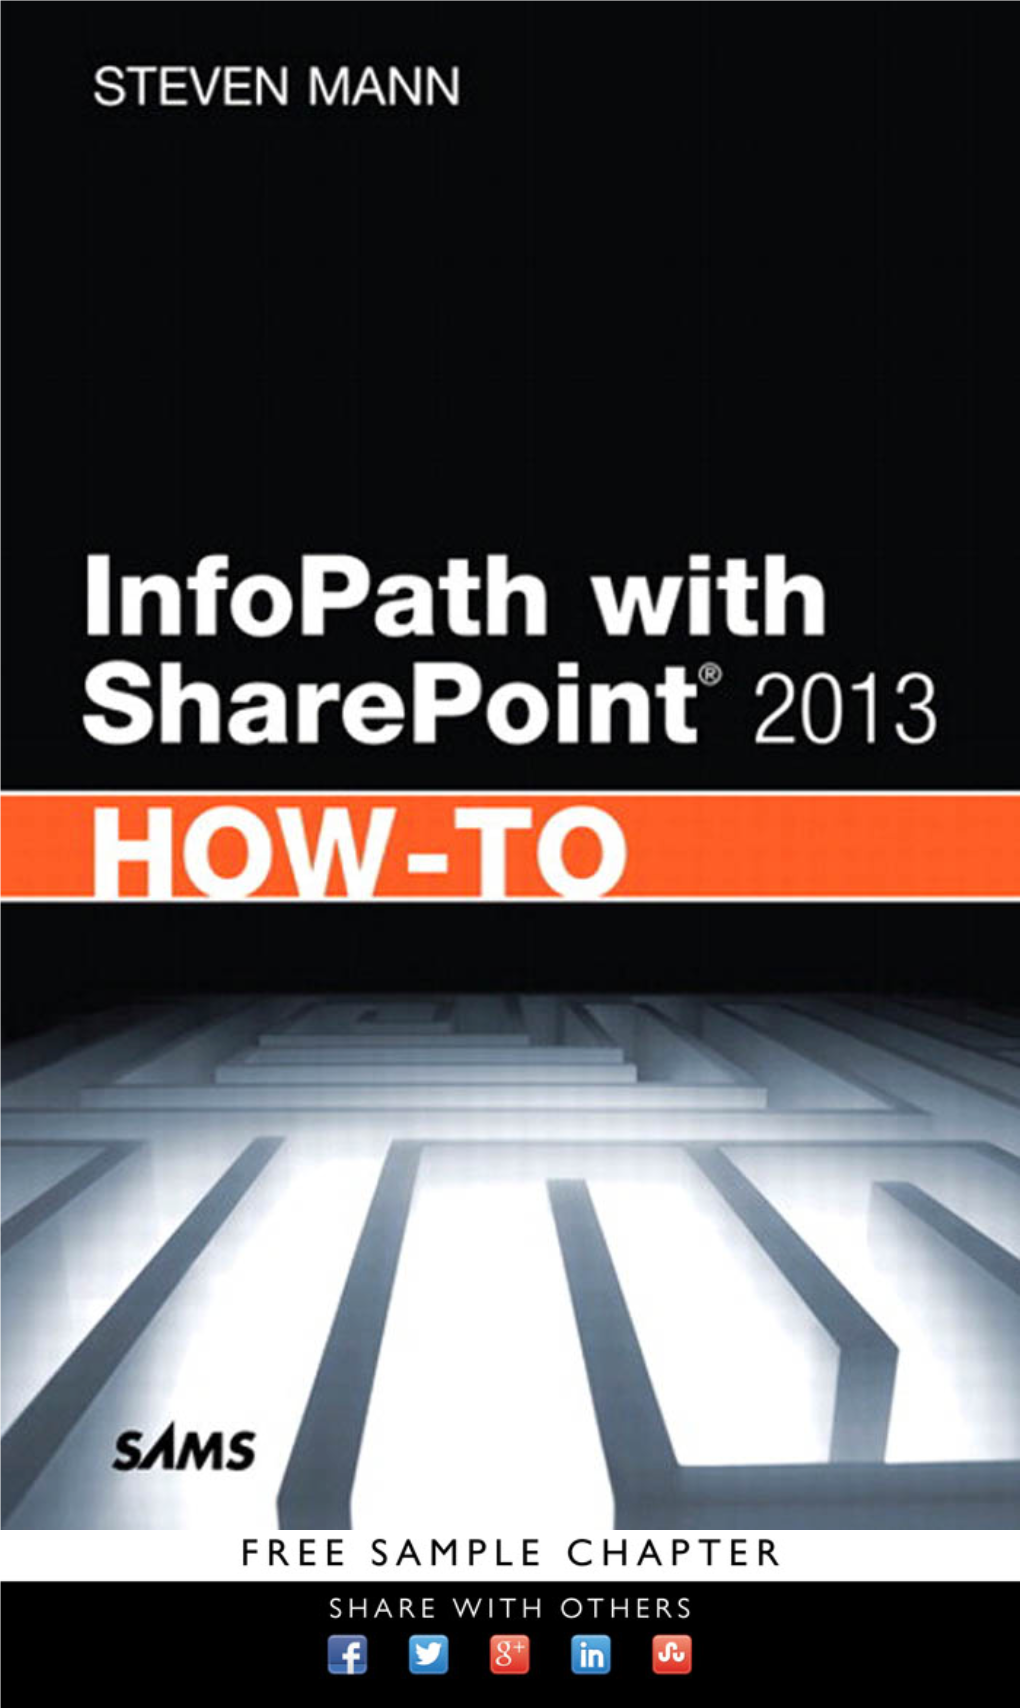 Infopath with Sharepoint® 2013 How-To